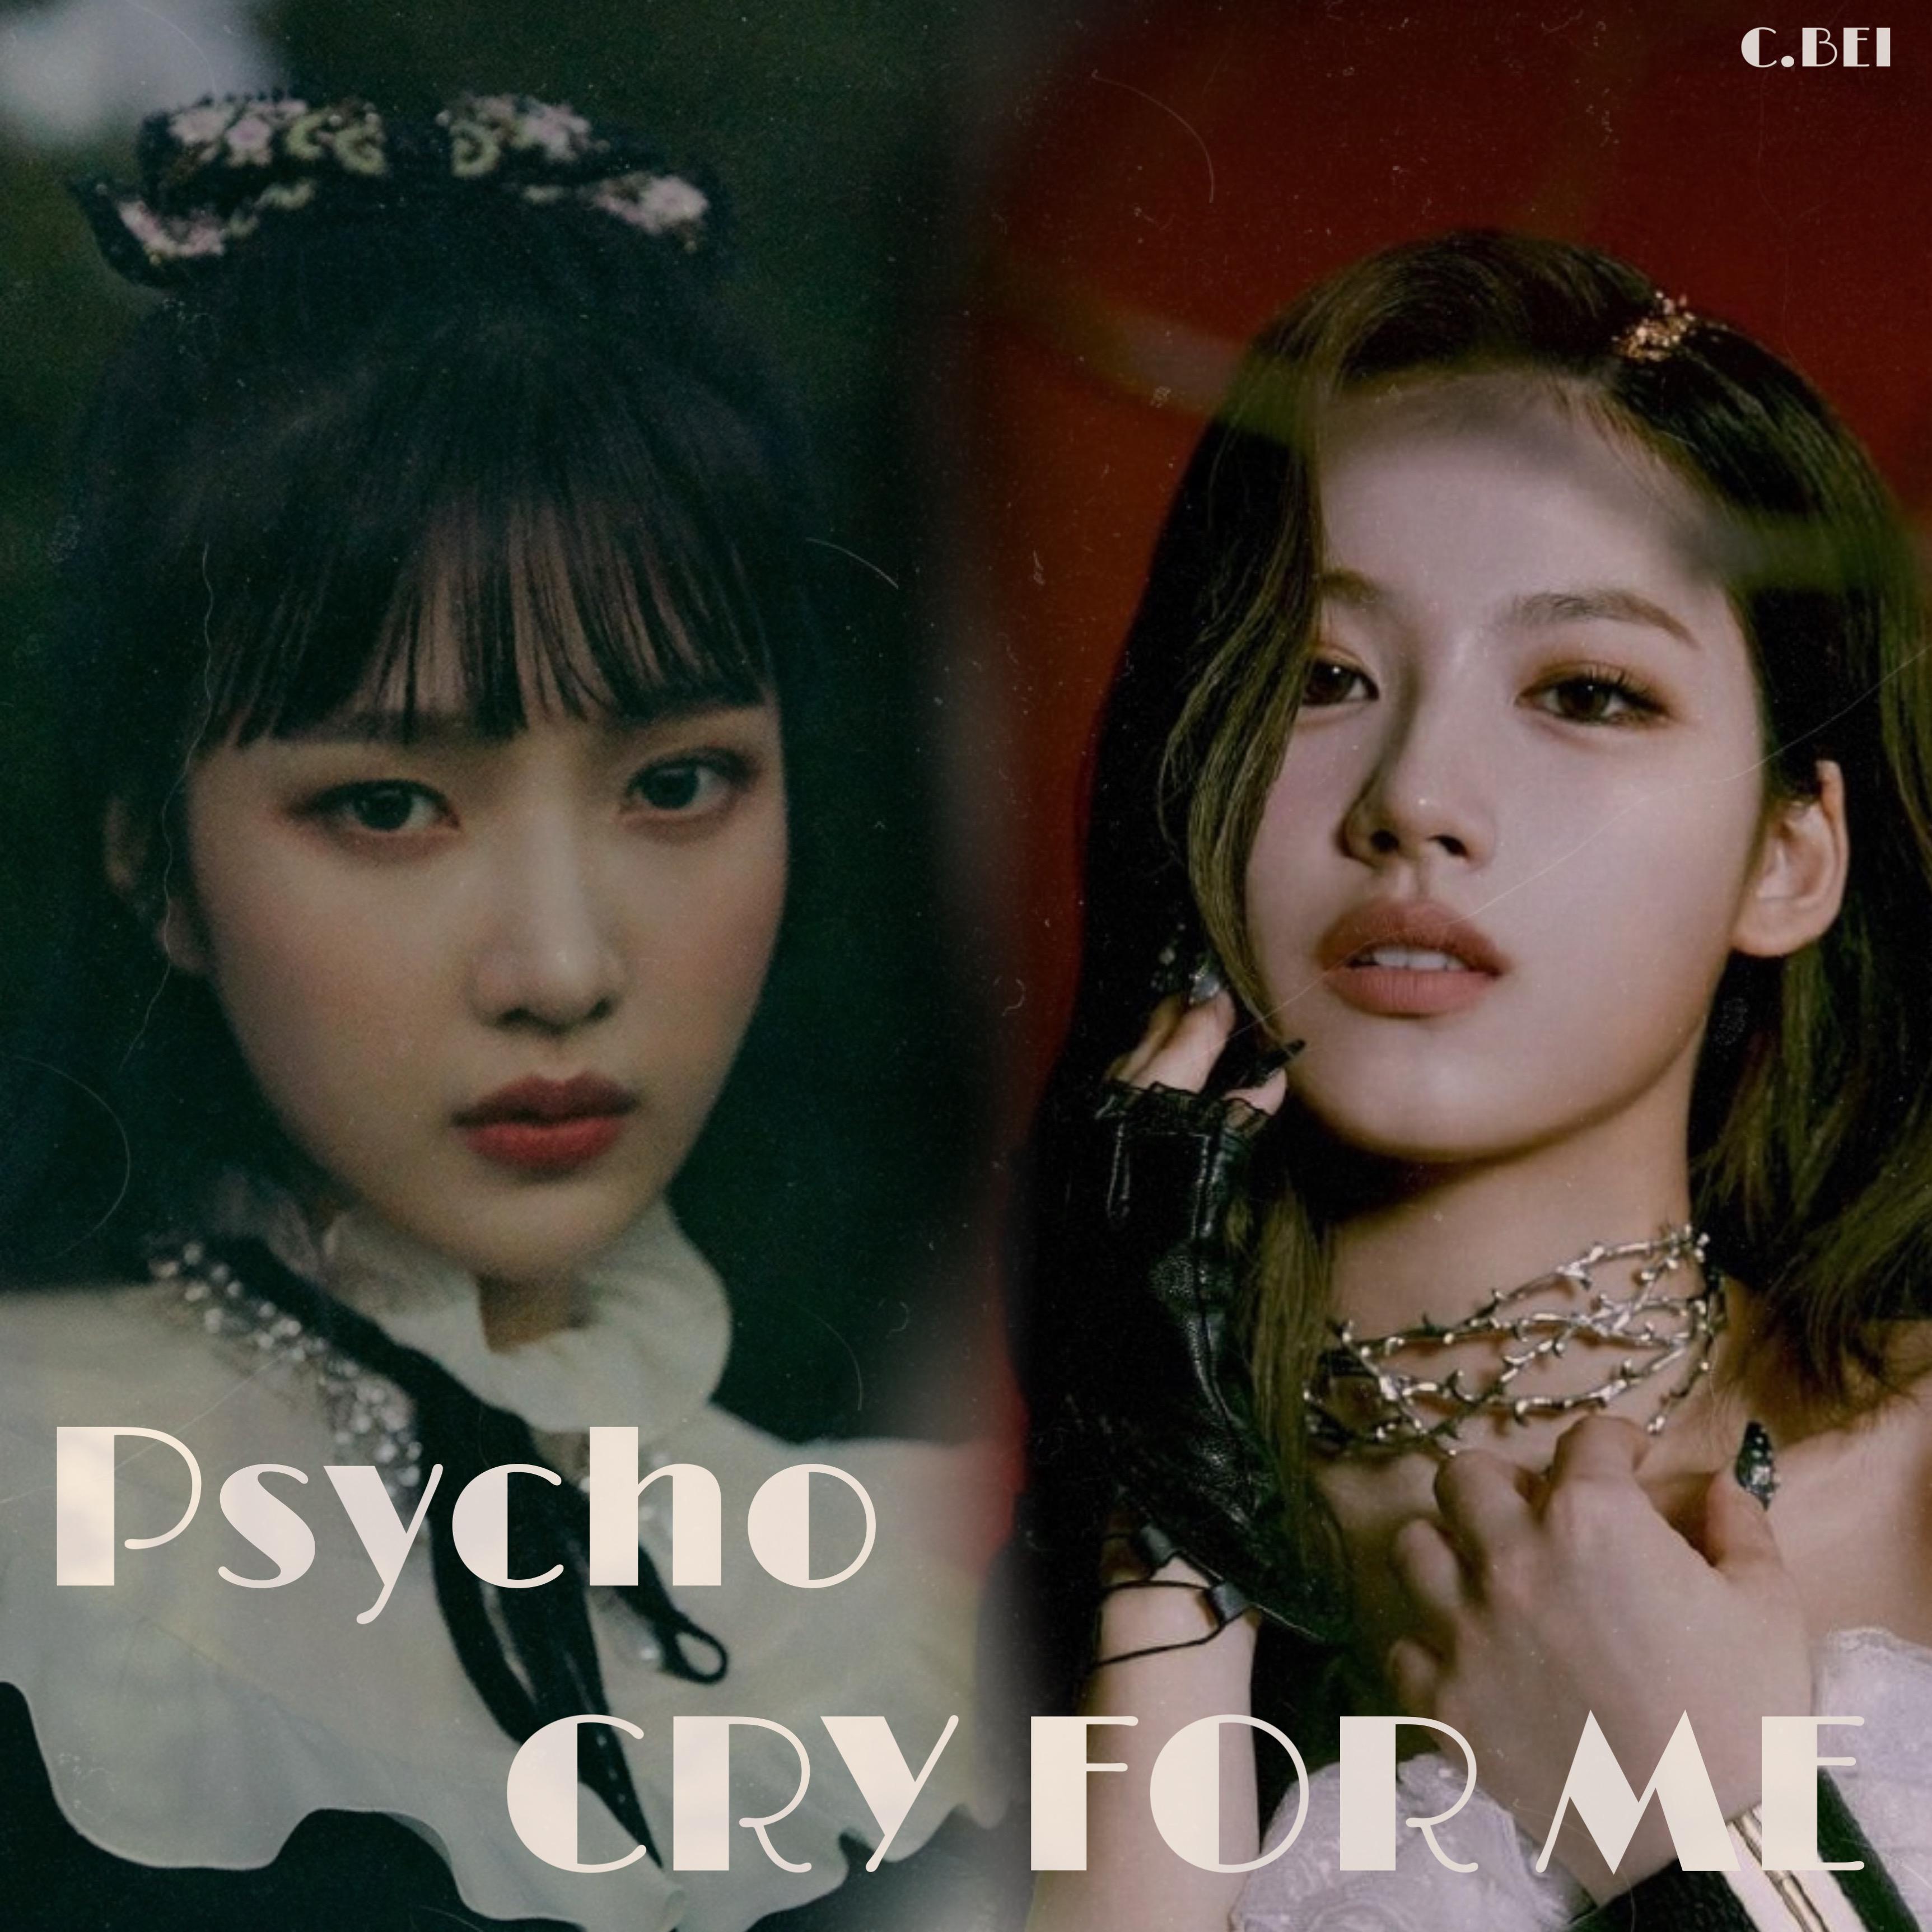 CRY FOR ME(Psycho inst.)歌词 歌手糙北-专辑CRY FOR ME(Psycho inst.)-单曲《CRY FOR ME(Psycho inst.)》LRC歌词下载